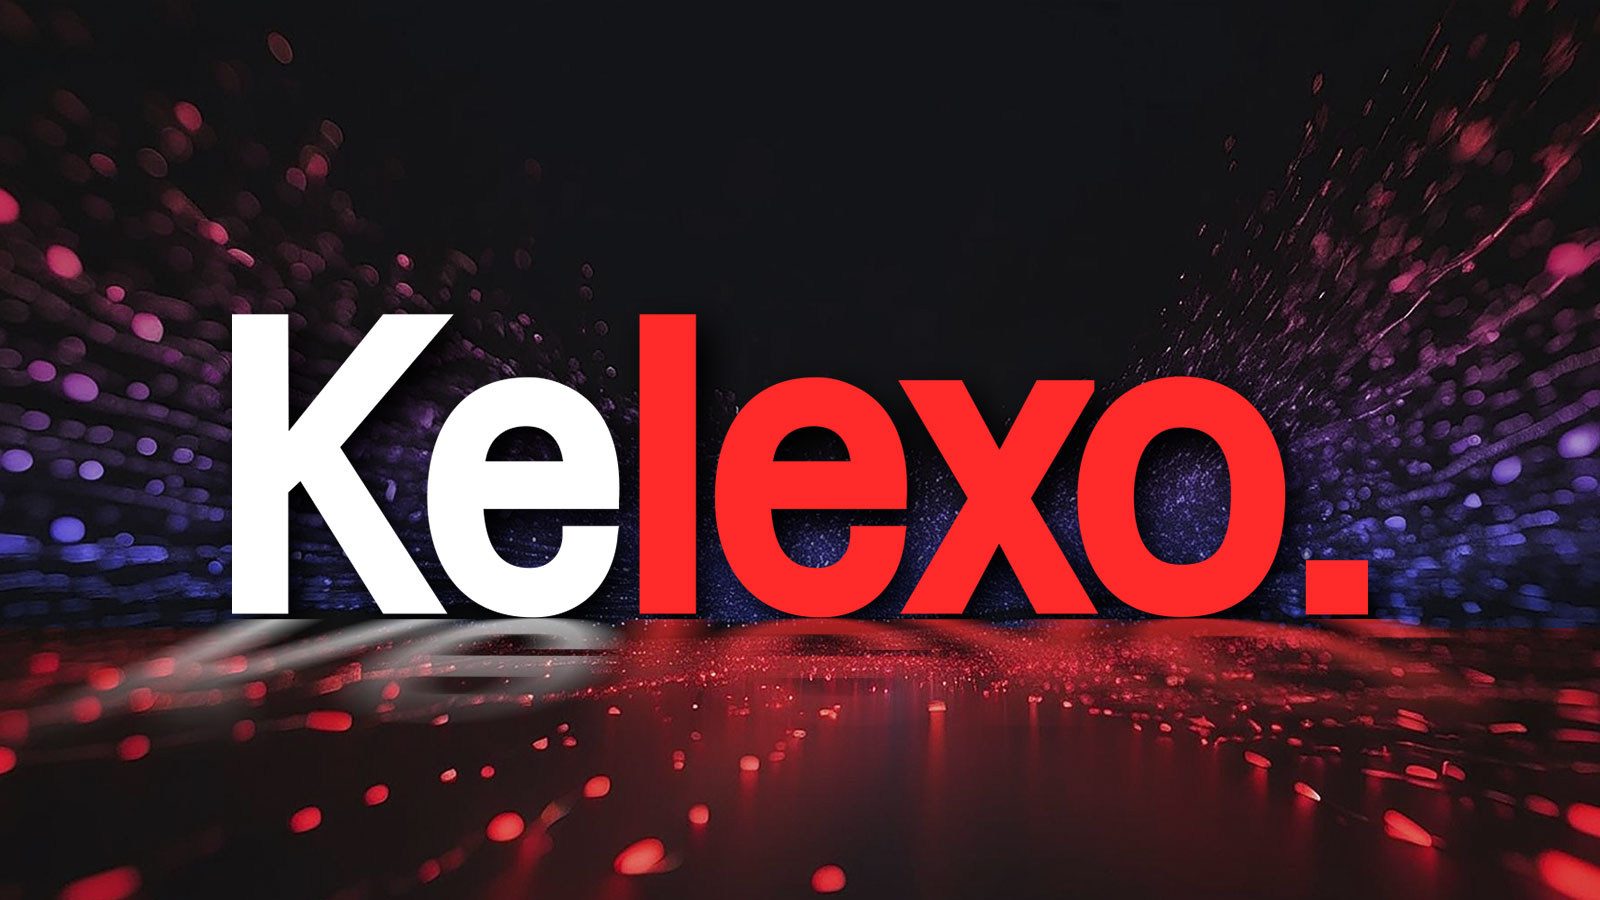 Kelexo (KLXO) Pre-Sale Garnering Traction while Avalanche (AVAX) and Solana (SOL) Communities Ready for Network Upgrades